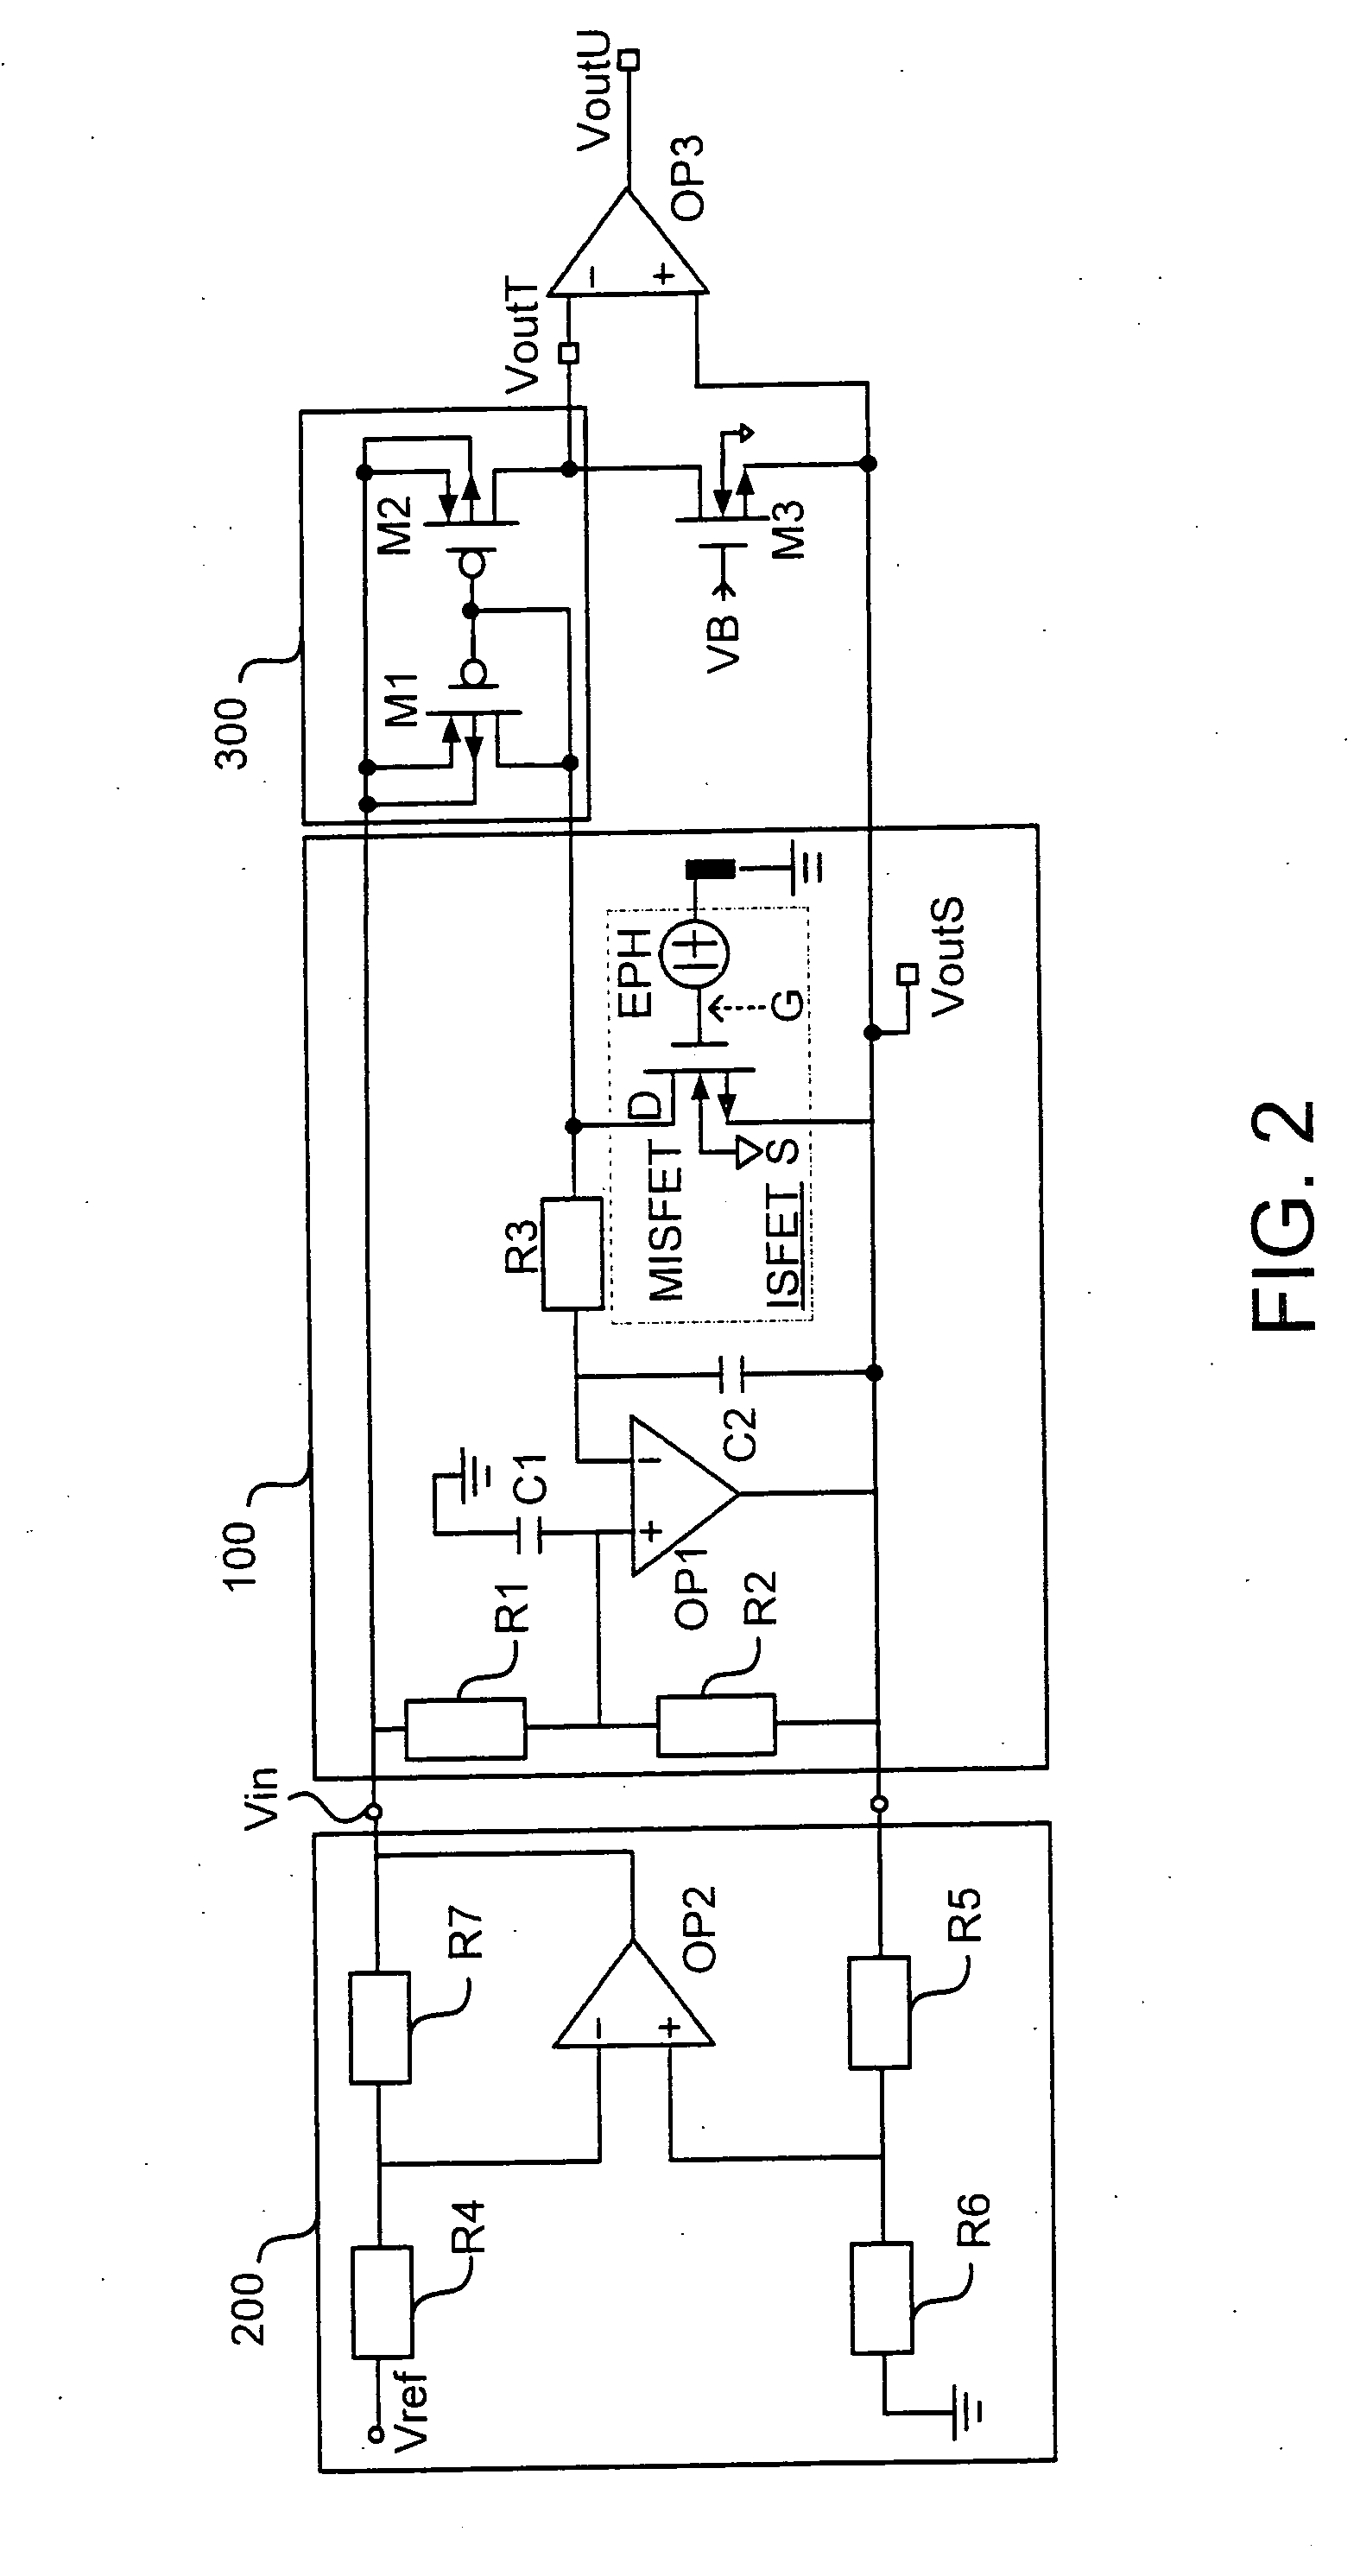 Electronic circuit for ion sensor with body effect reduction